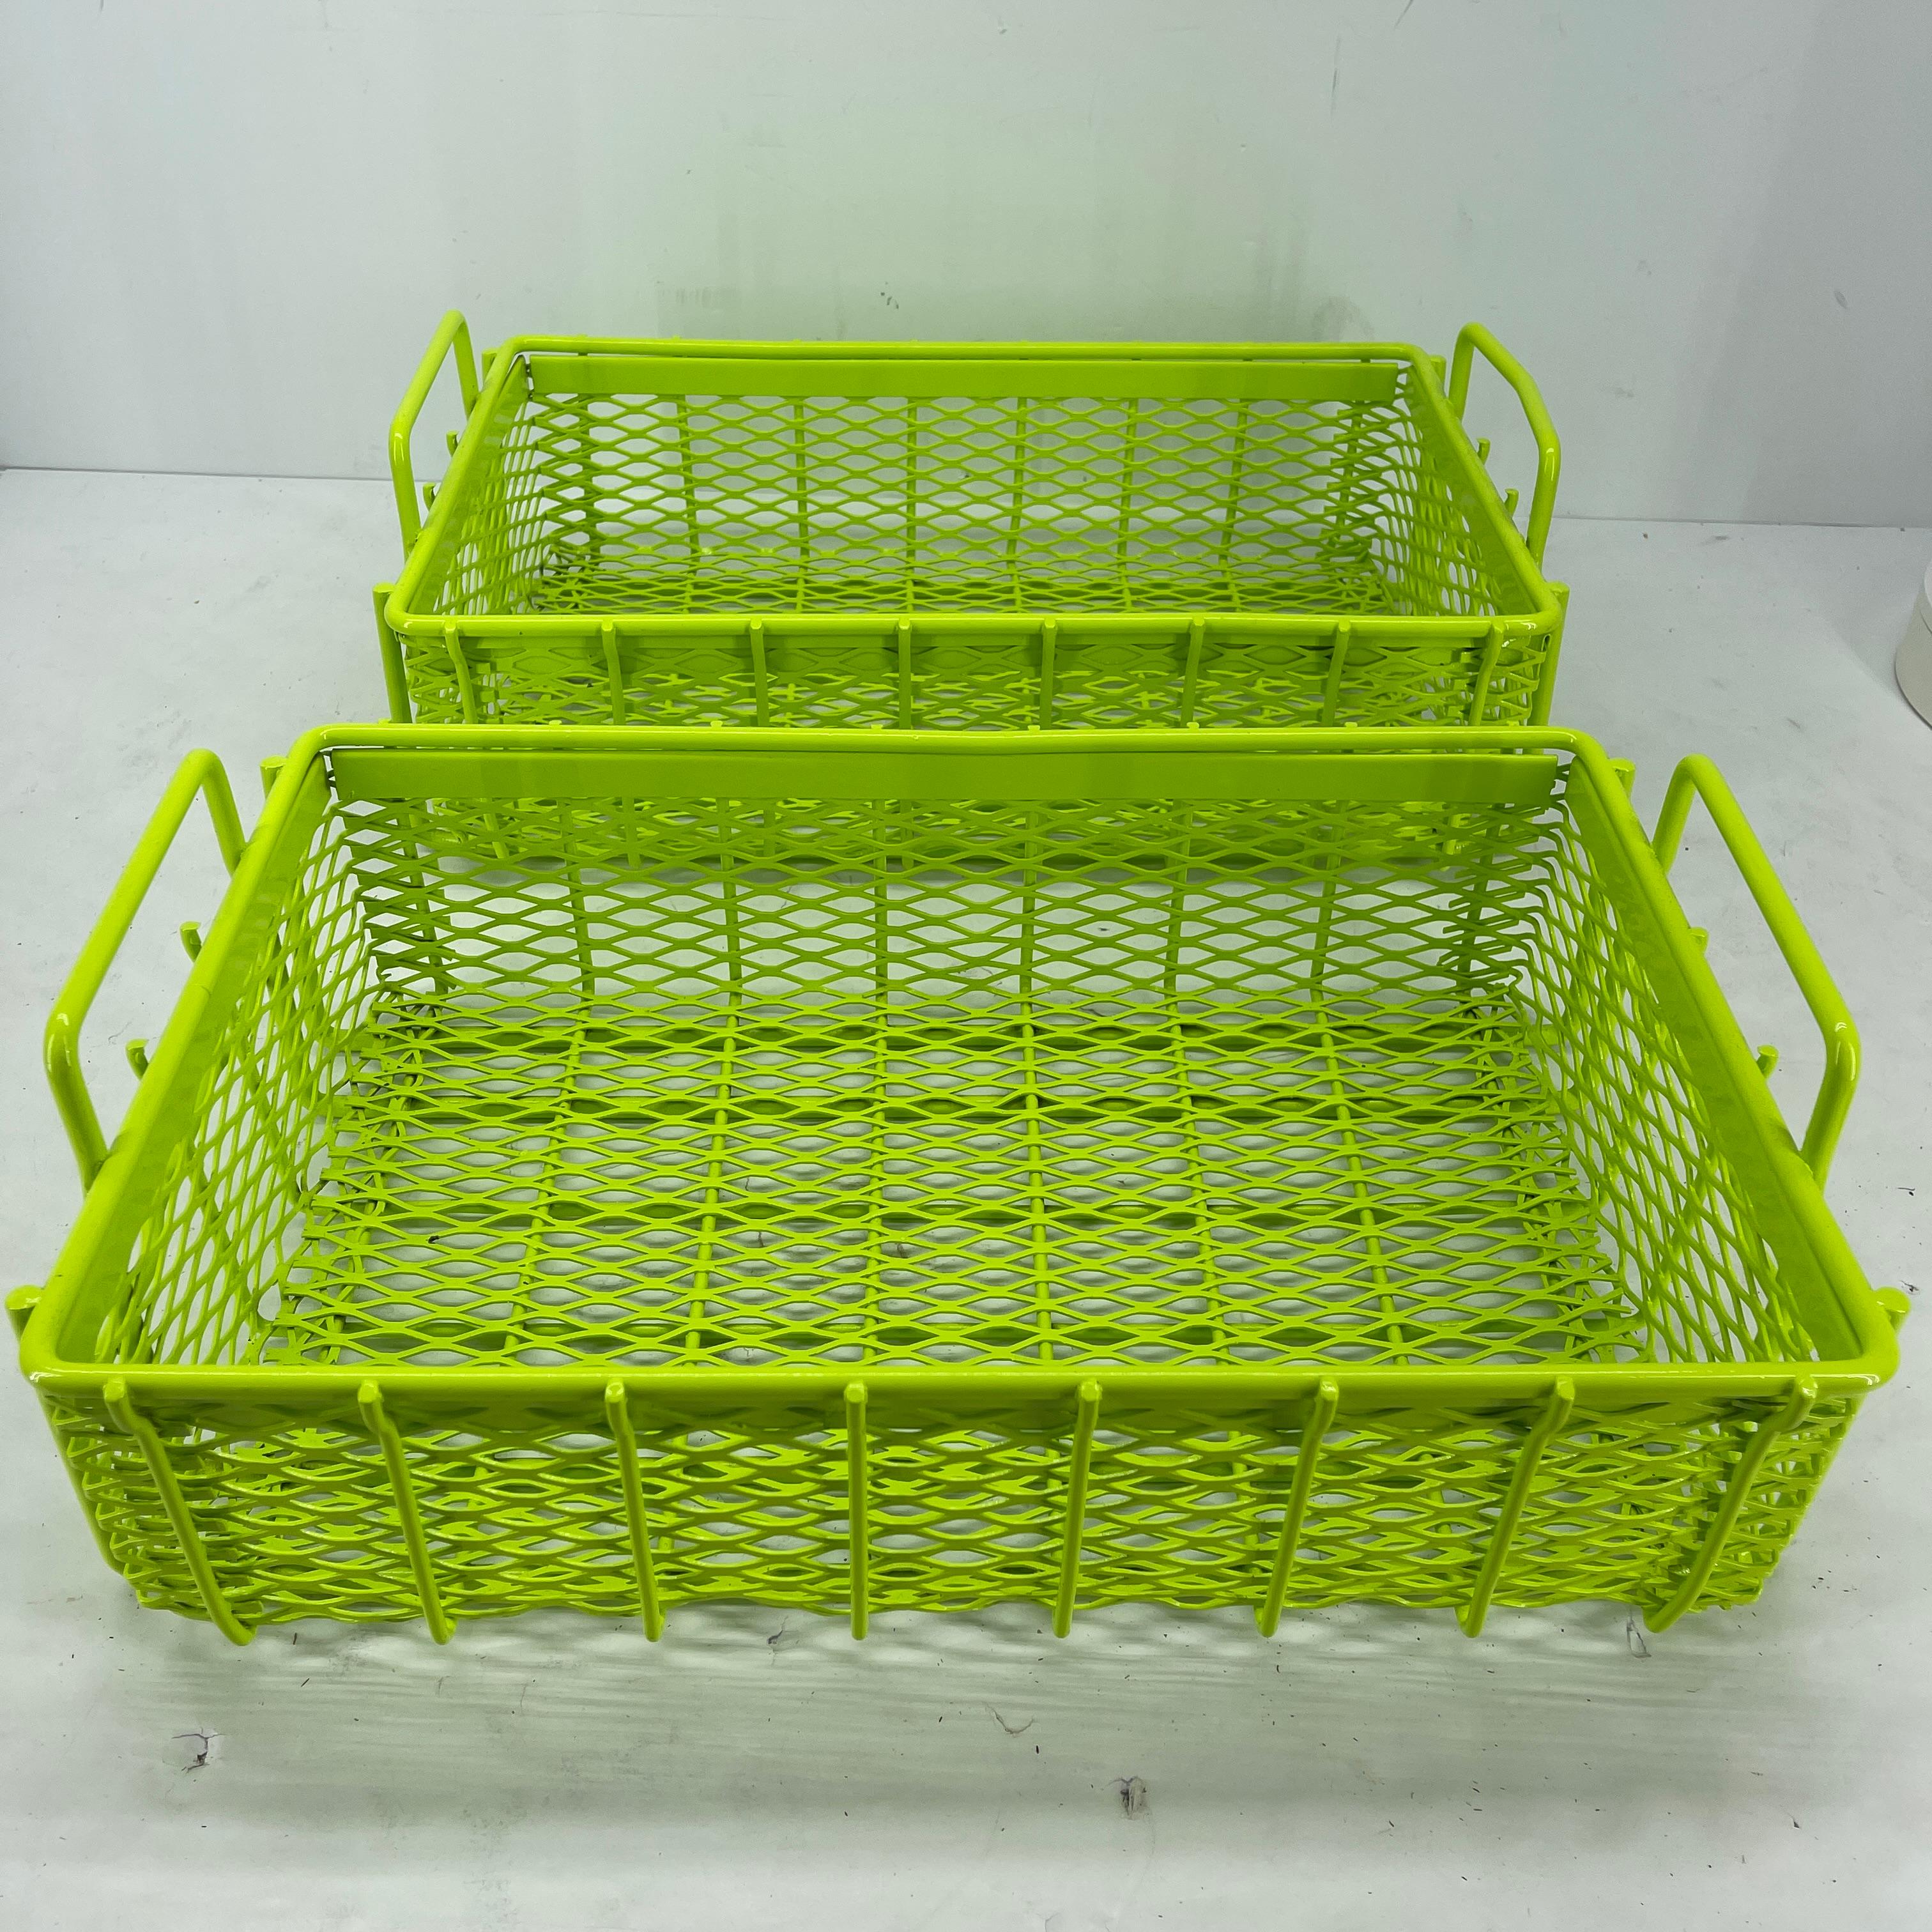 Mid-20th Century Industrial Era Metal Storage Bins, Powder Coated Bright Chartreuse For Sale